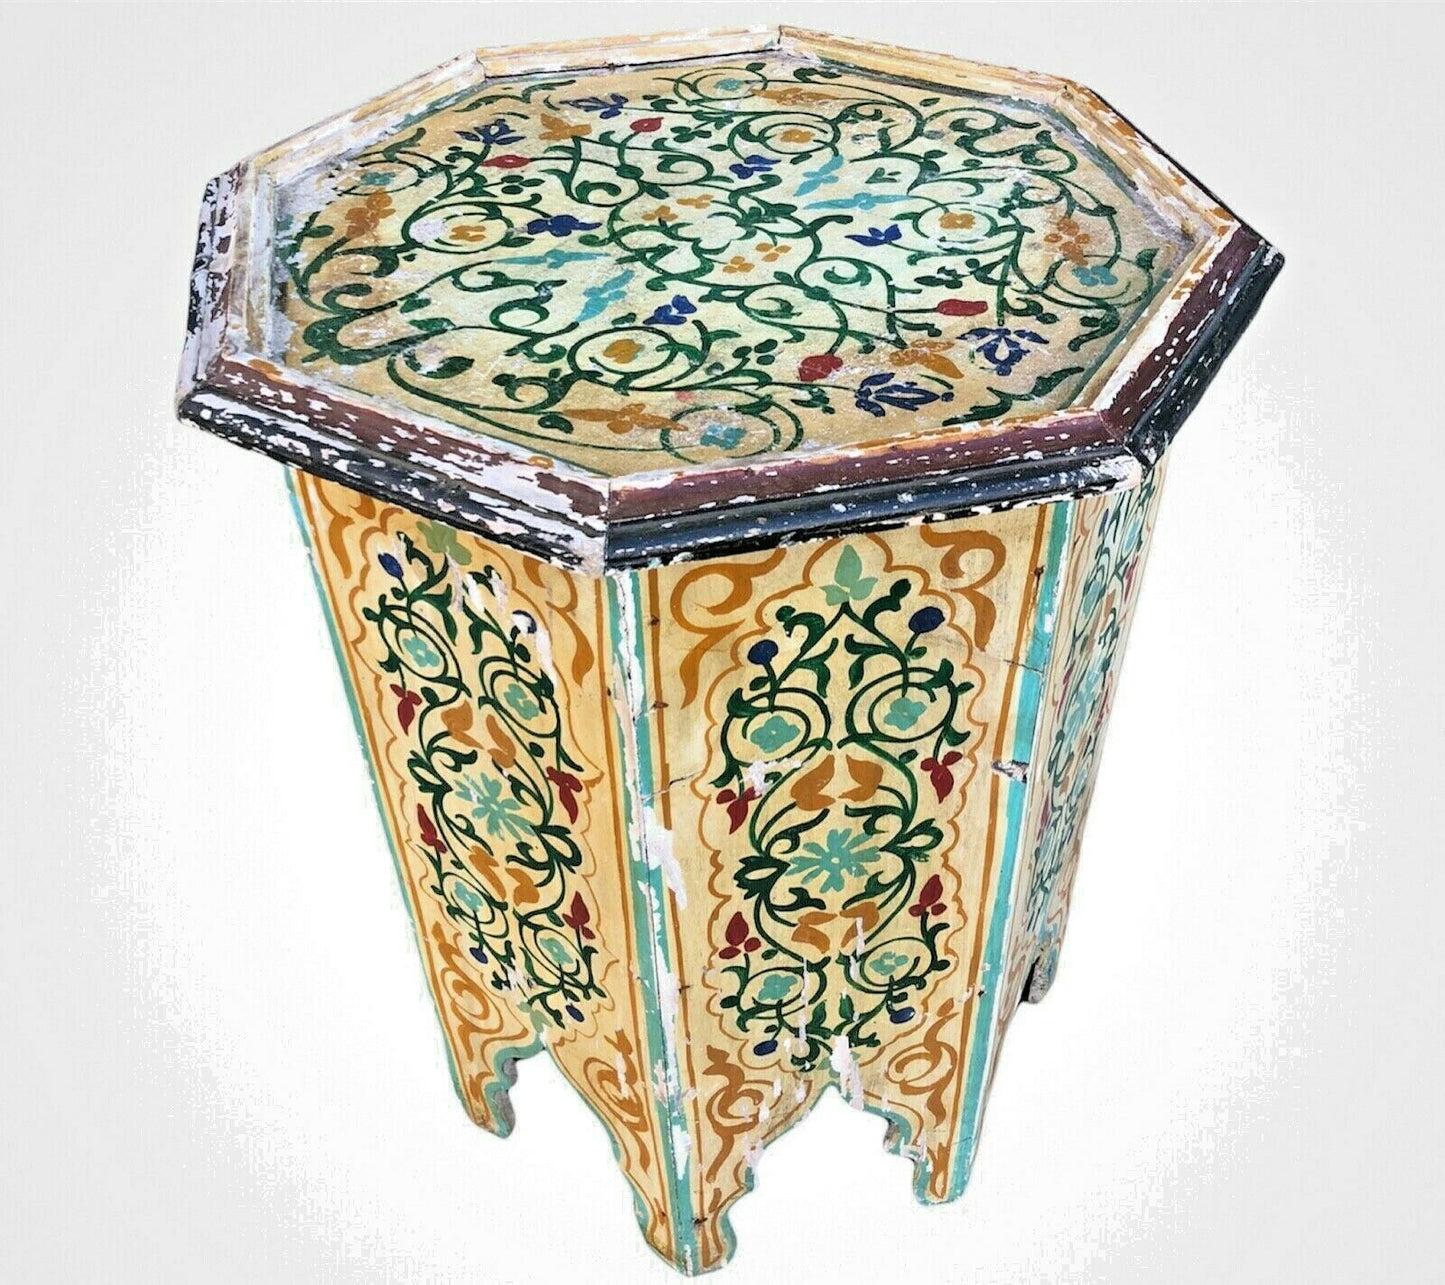 Vintage Indian Hand Painted Table ( SOLD )